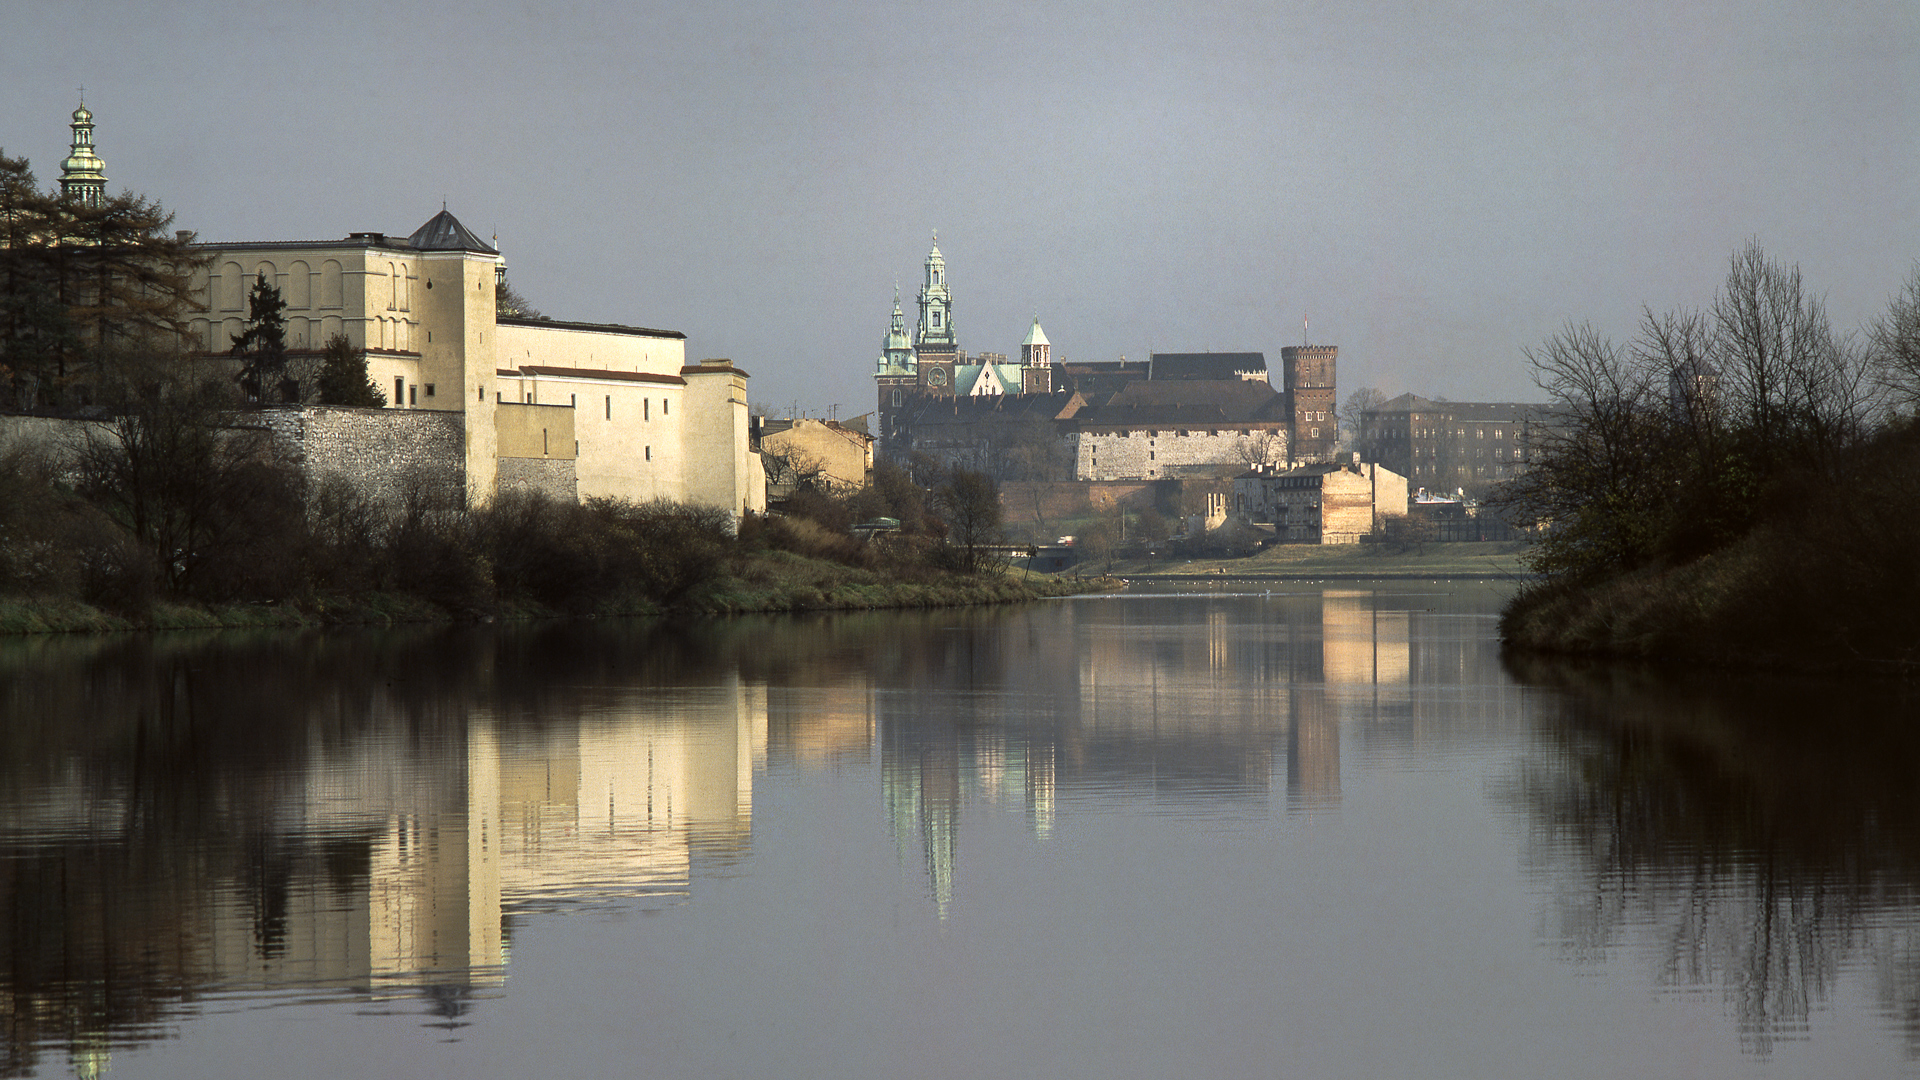 Photo of a mediaeval castle on a river bank.